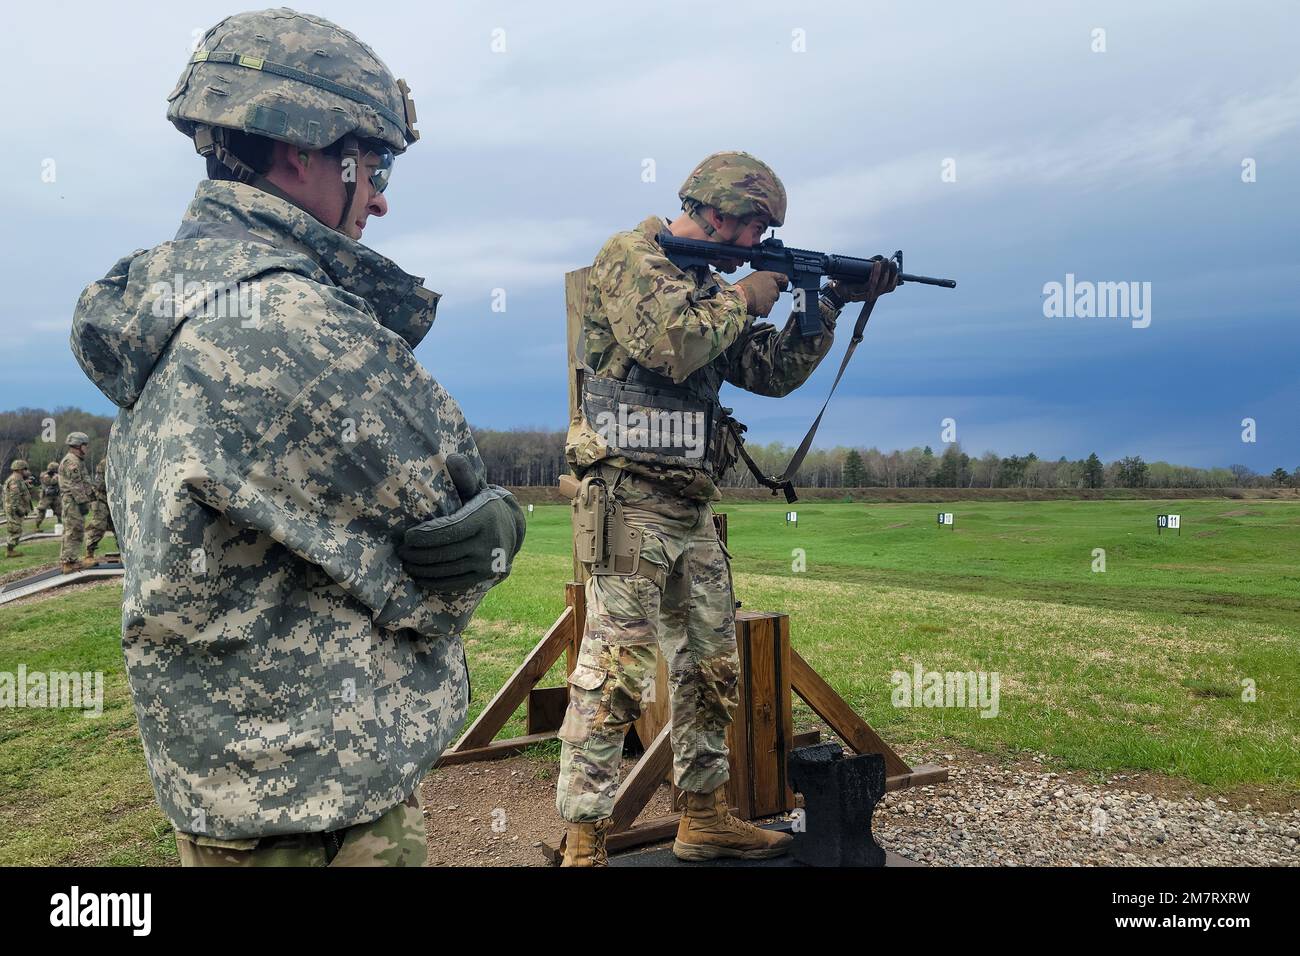 Spc. Nathaniel Miska of Oakdale, Minnesota, a Carpentry and Masonry  Specialist with the Minnesota National Guard's 850th Engineer Company,  fires an M4 carbine. He is one of twelve National Guard Soldiers who